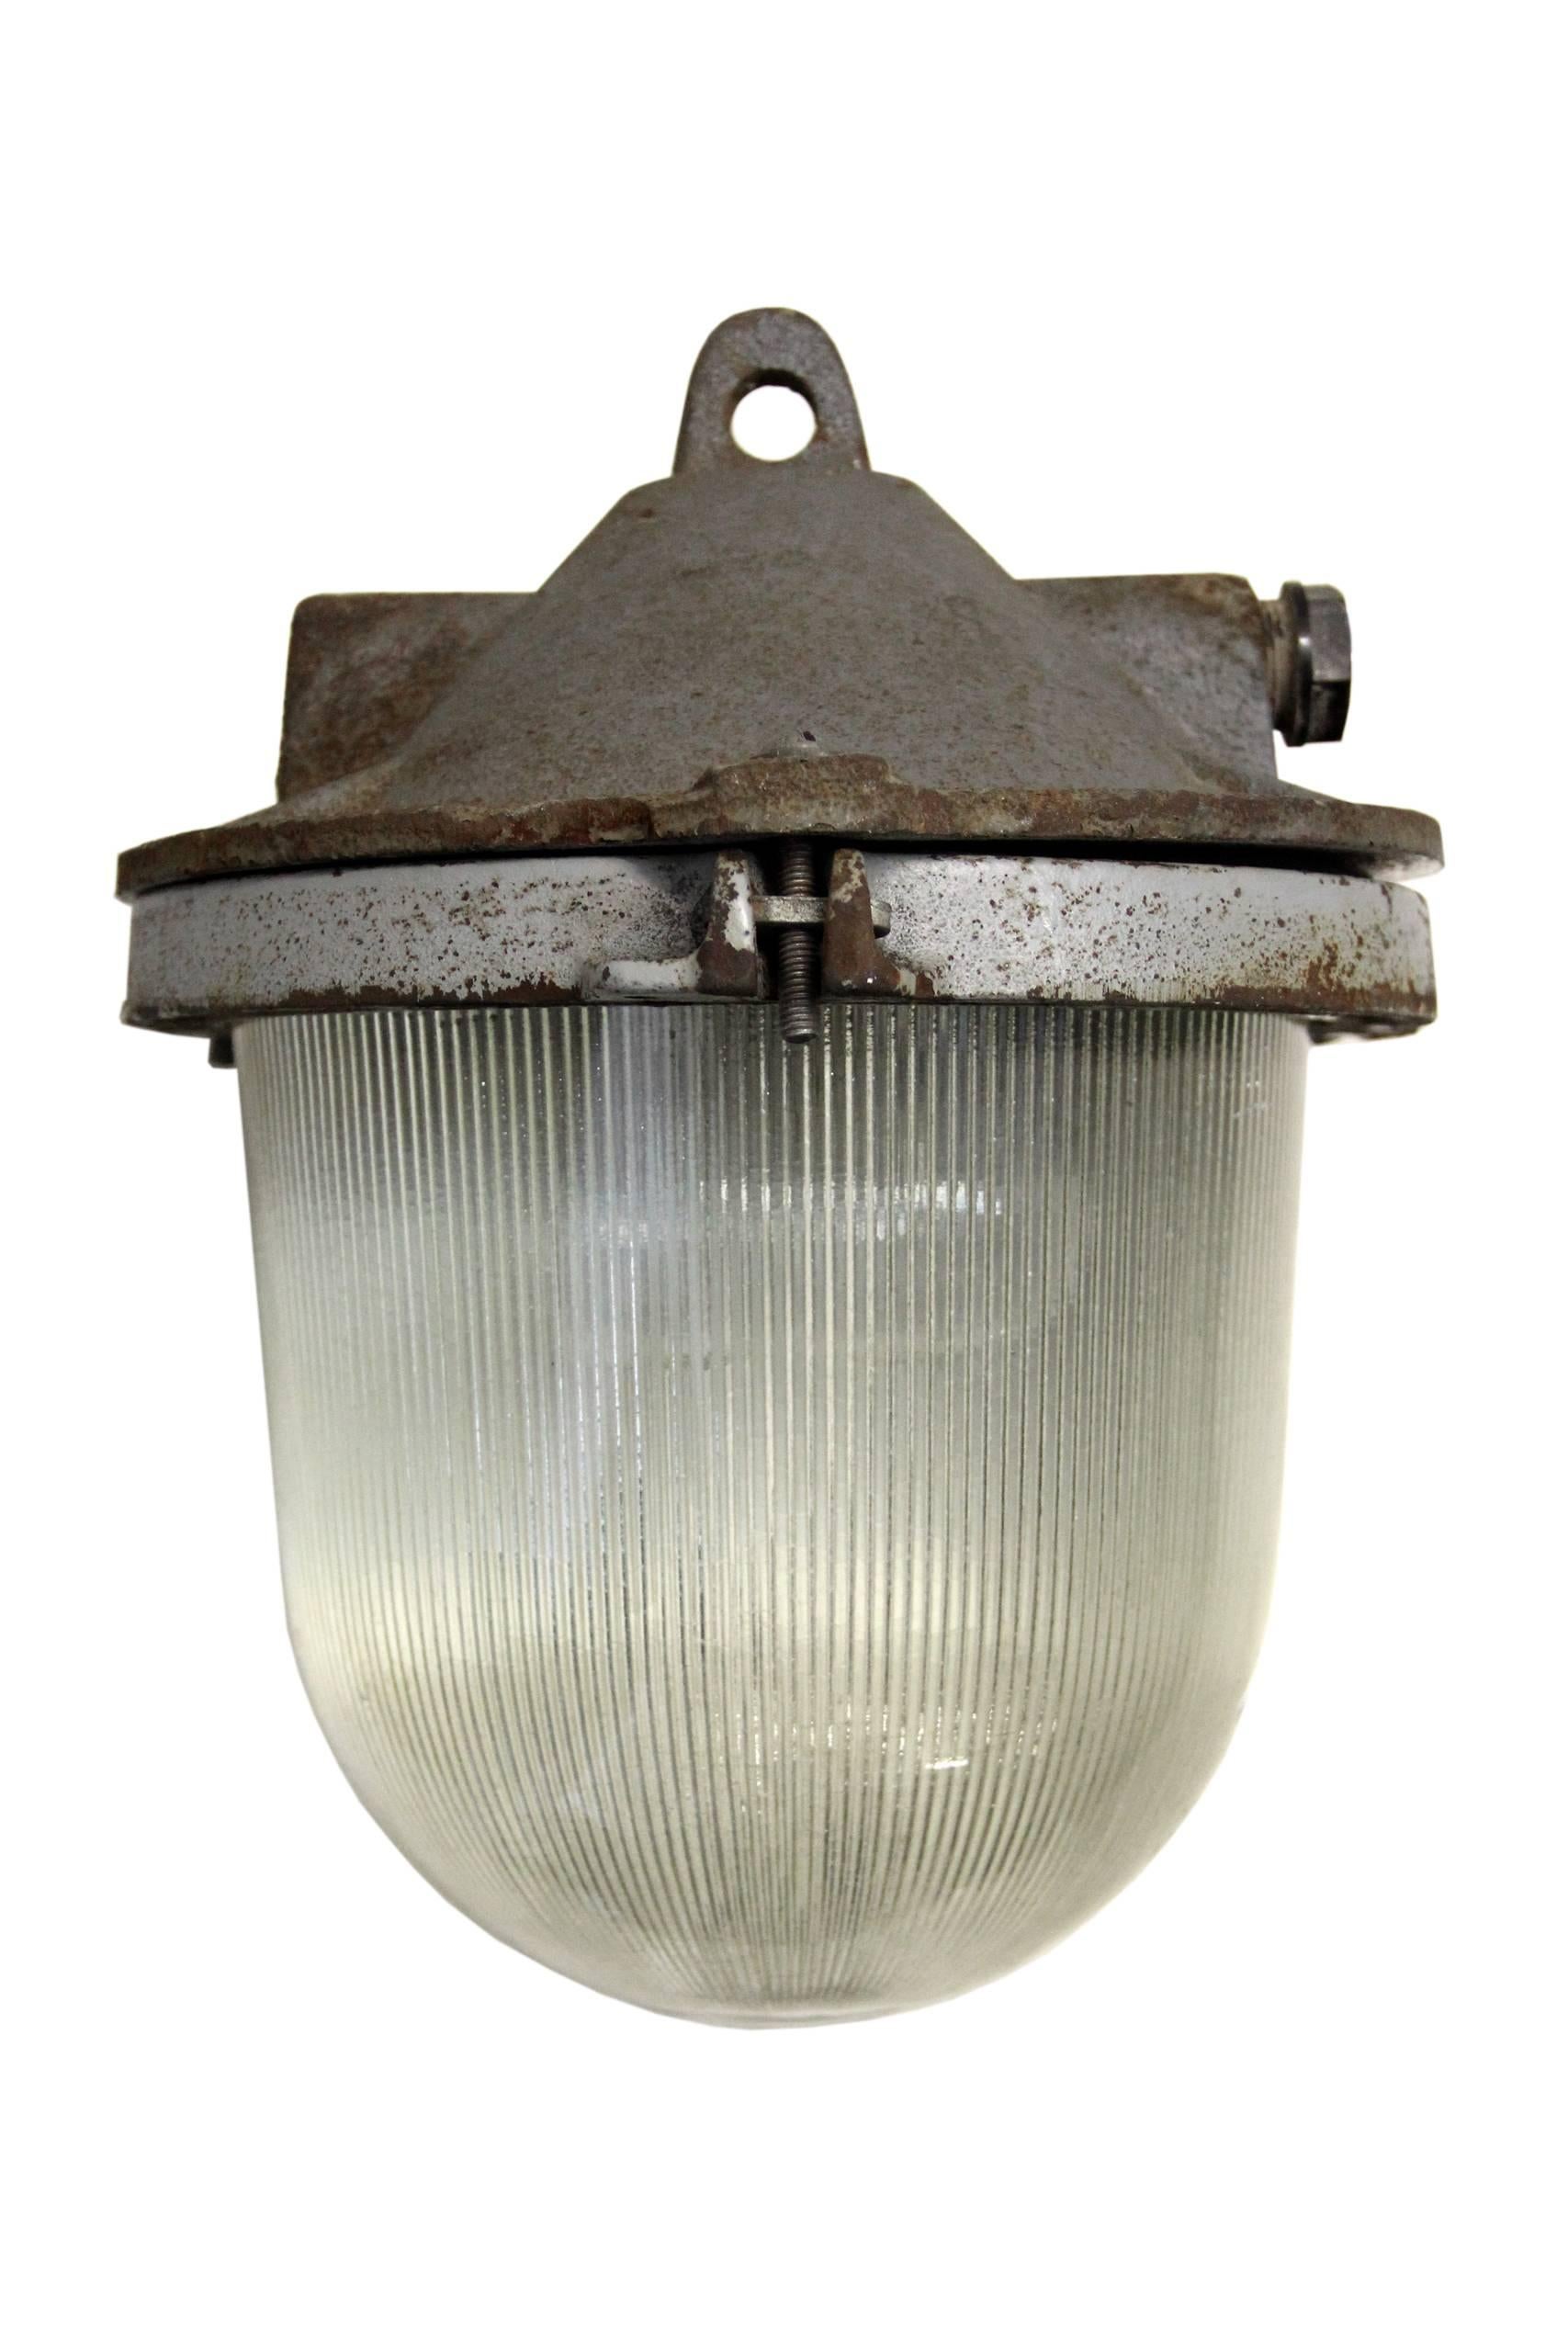 Hanging lamp Industrial cast iron. Holophane glass.

Weight: 5.5 kg / 12.1 lb

All lamps have been made suitable by international standards for incandescent light bulbs, energy-efficient and LED bulbs. E26/E27 bulb holders and new wiring are CE